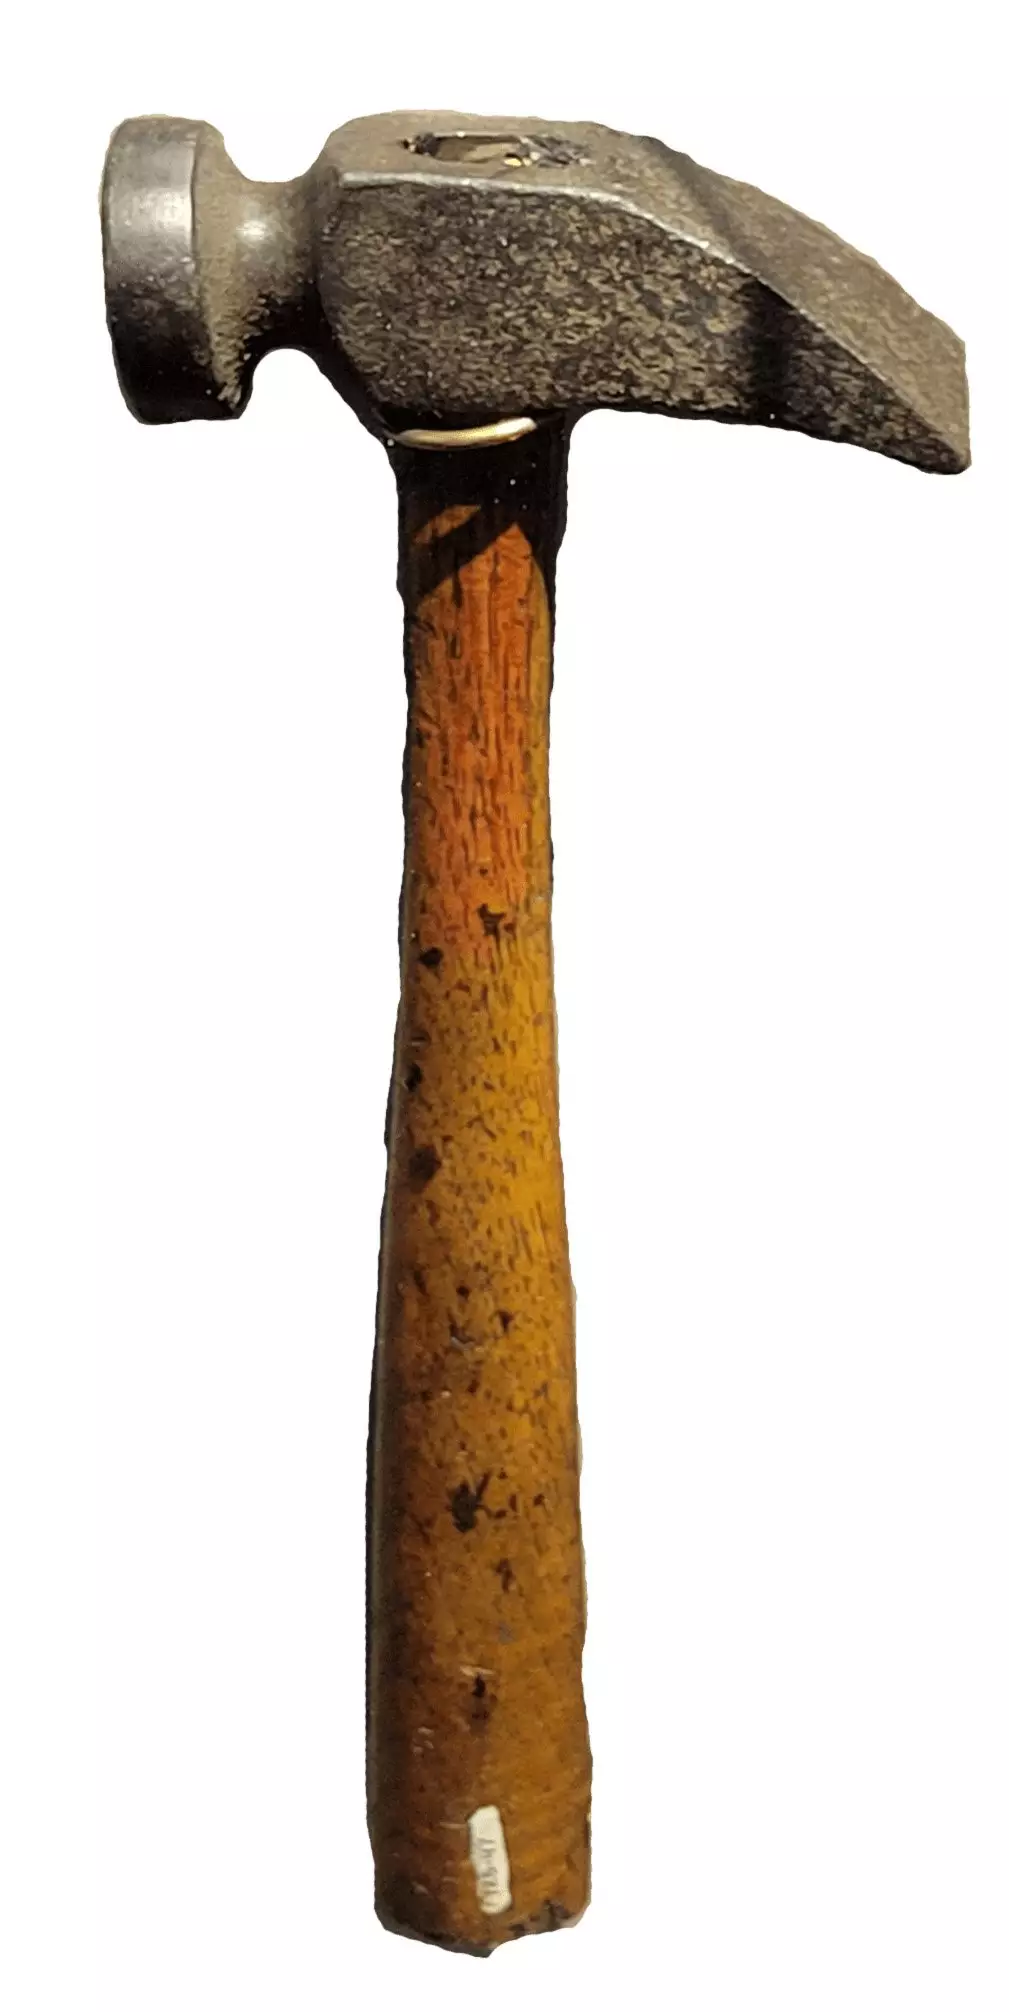 Metal Hammer with rounded left side, pointed right side, and tapered wood handle.